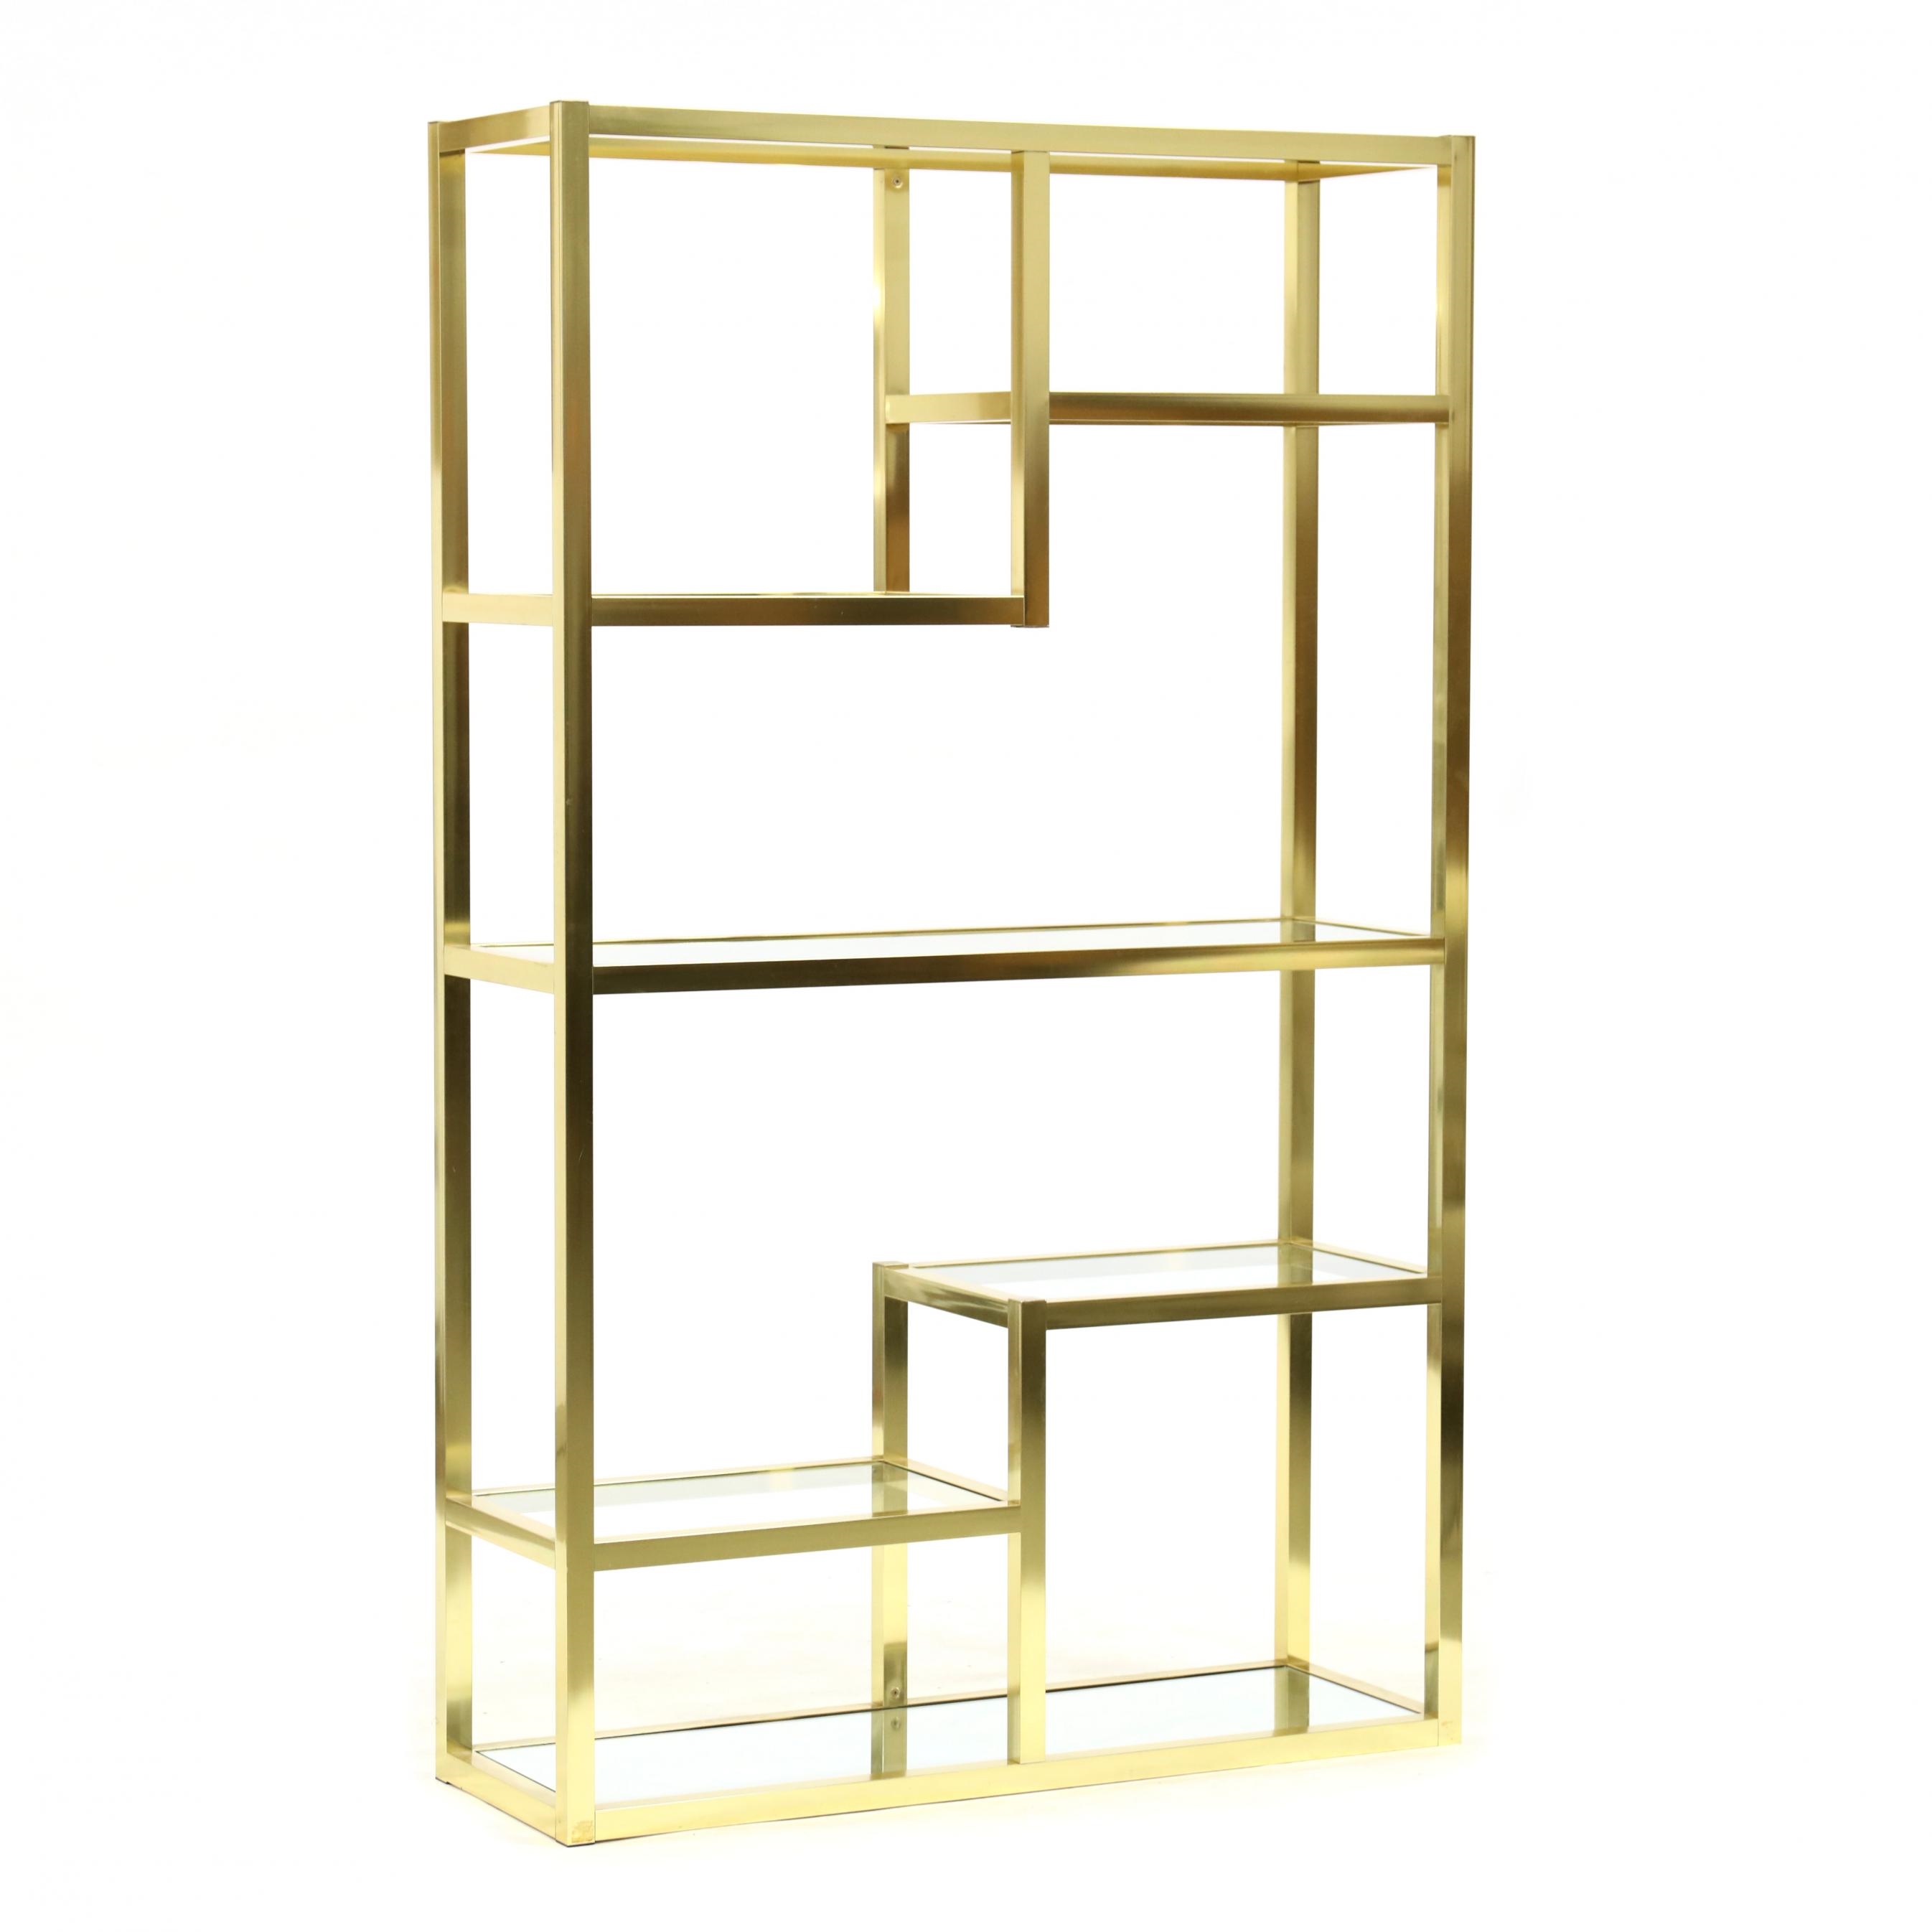 Late 20th Century Milo Baughman for Design Institute of America Polished  Chrome and Glass Etagere